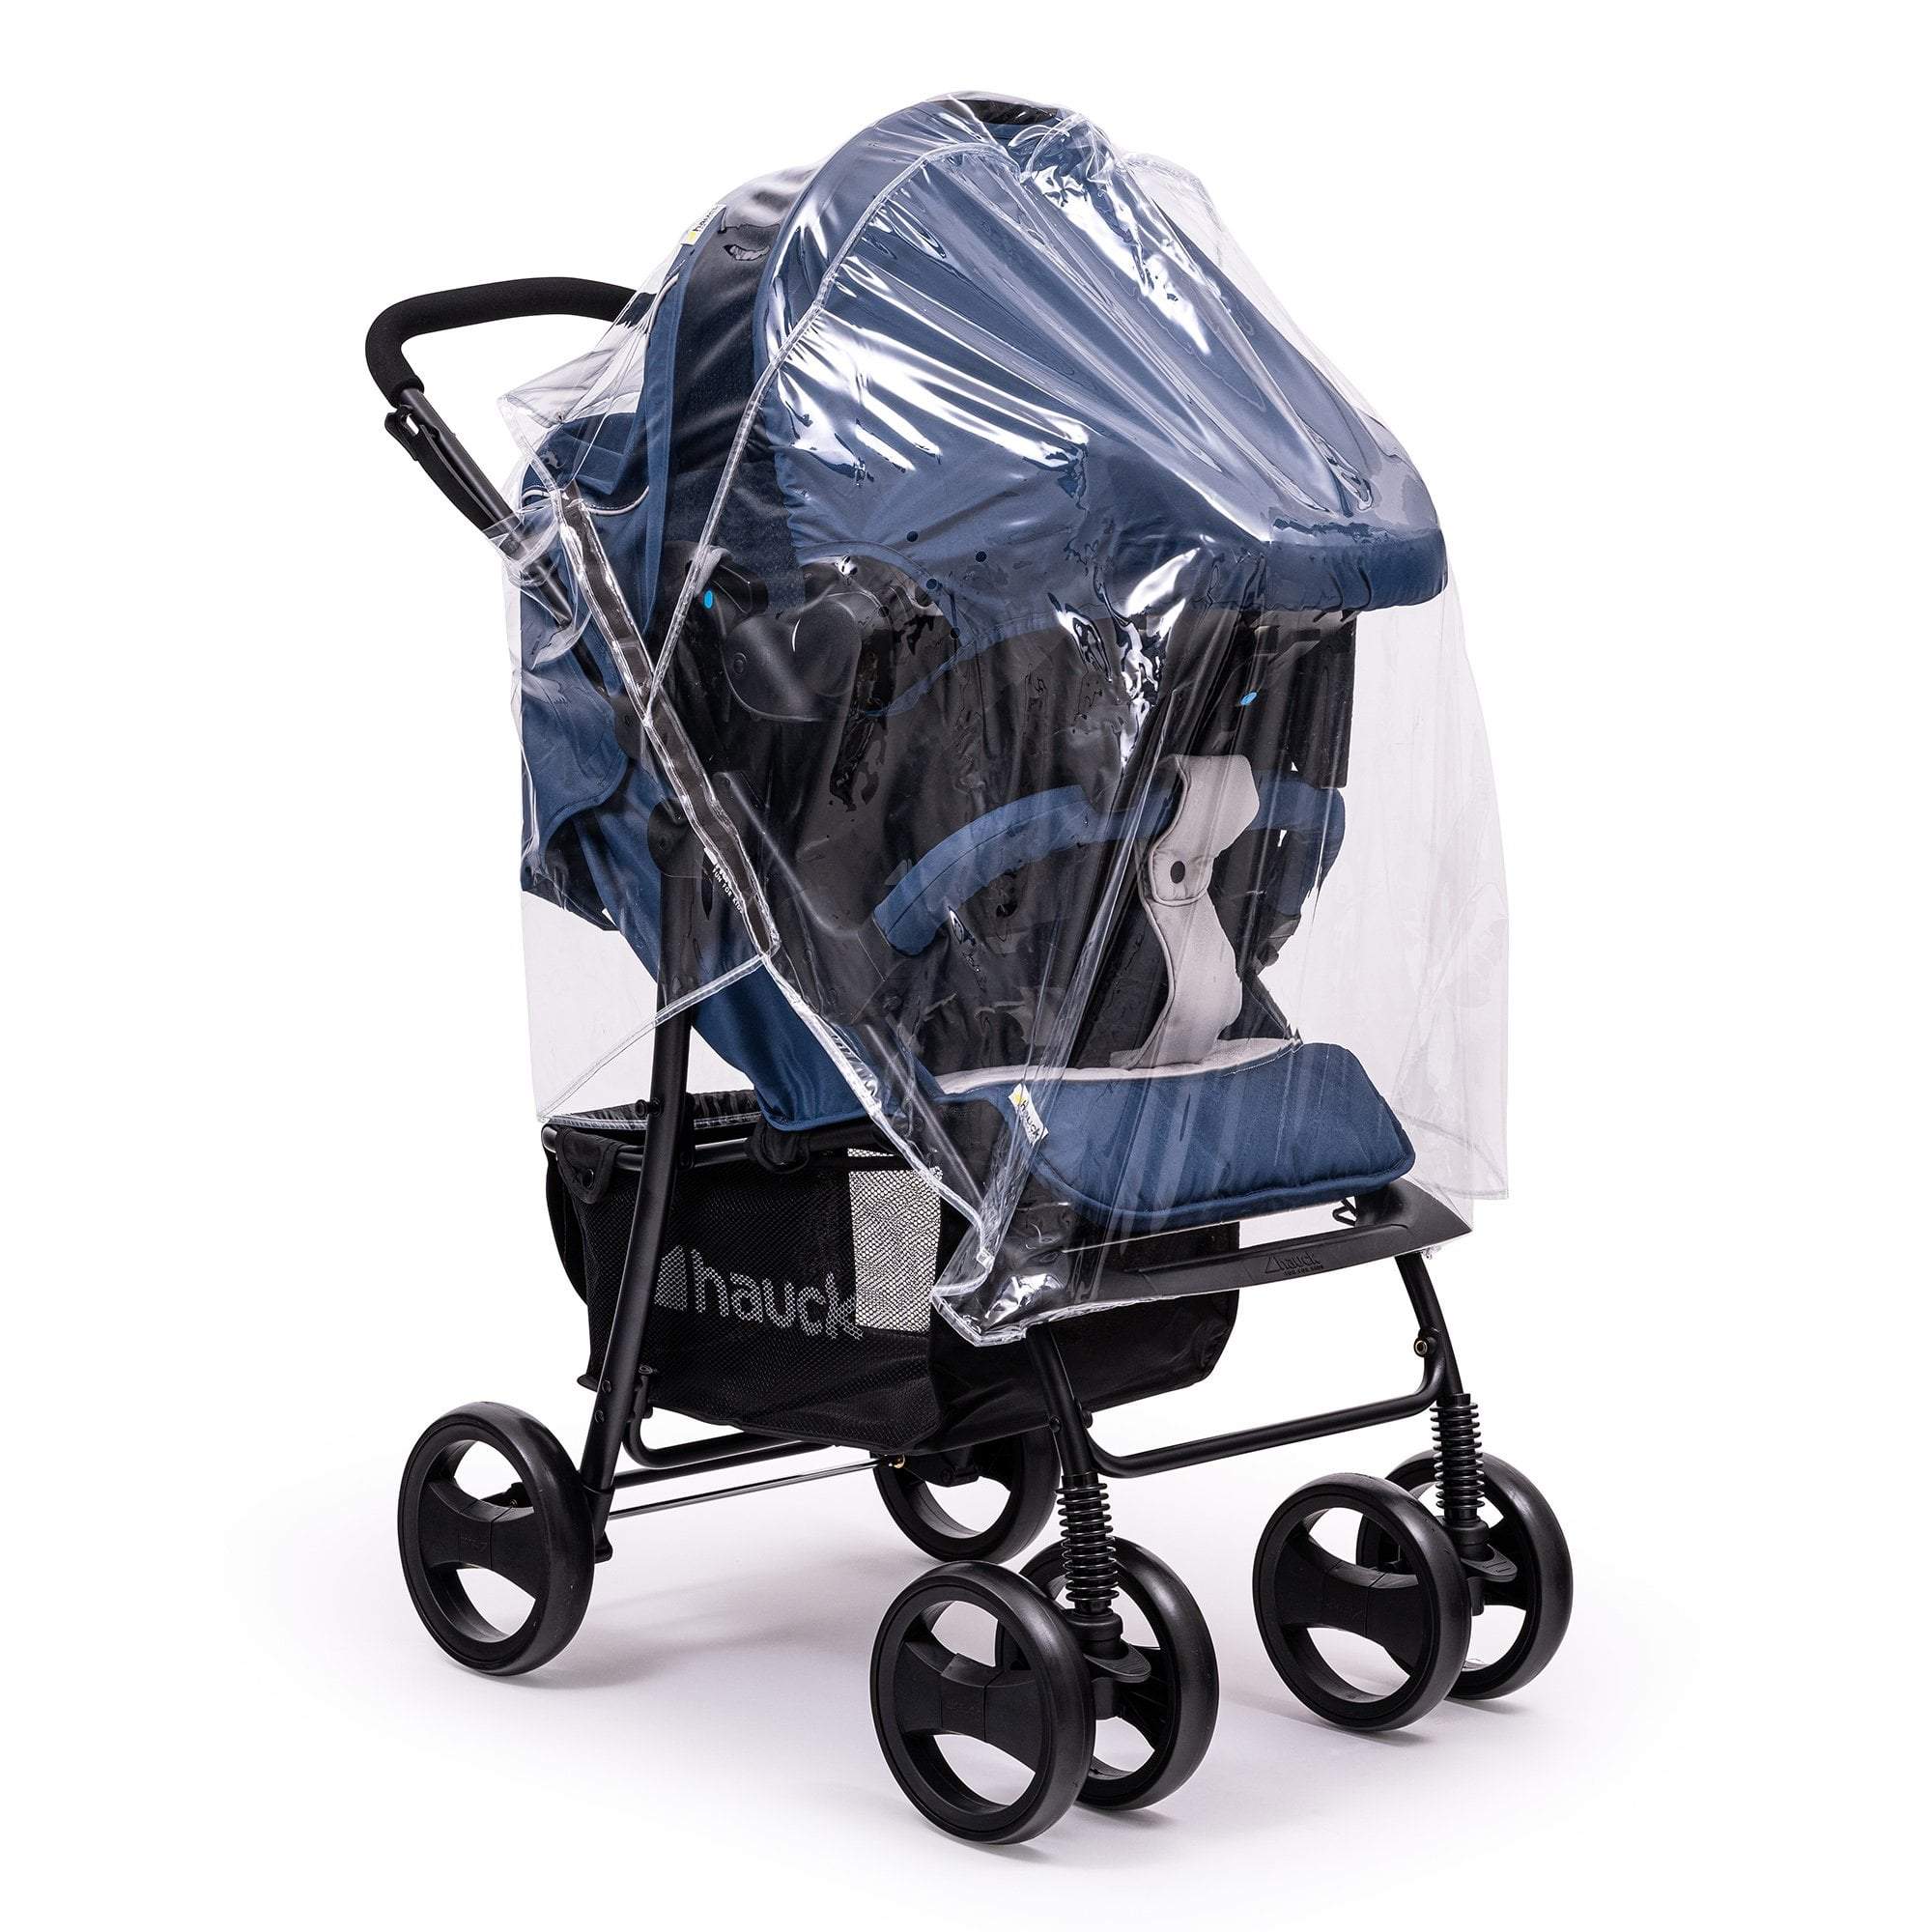 Travel System Raincover Compatible with Easywalker - Fits All Models - For Your Little One